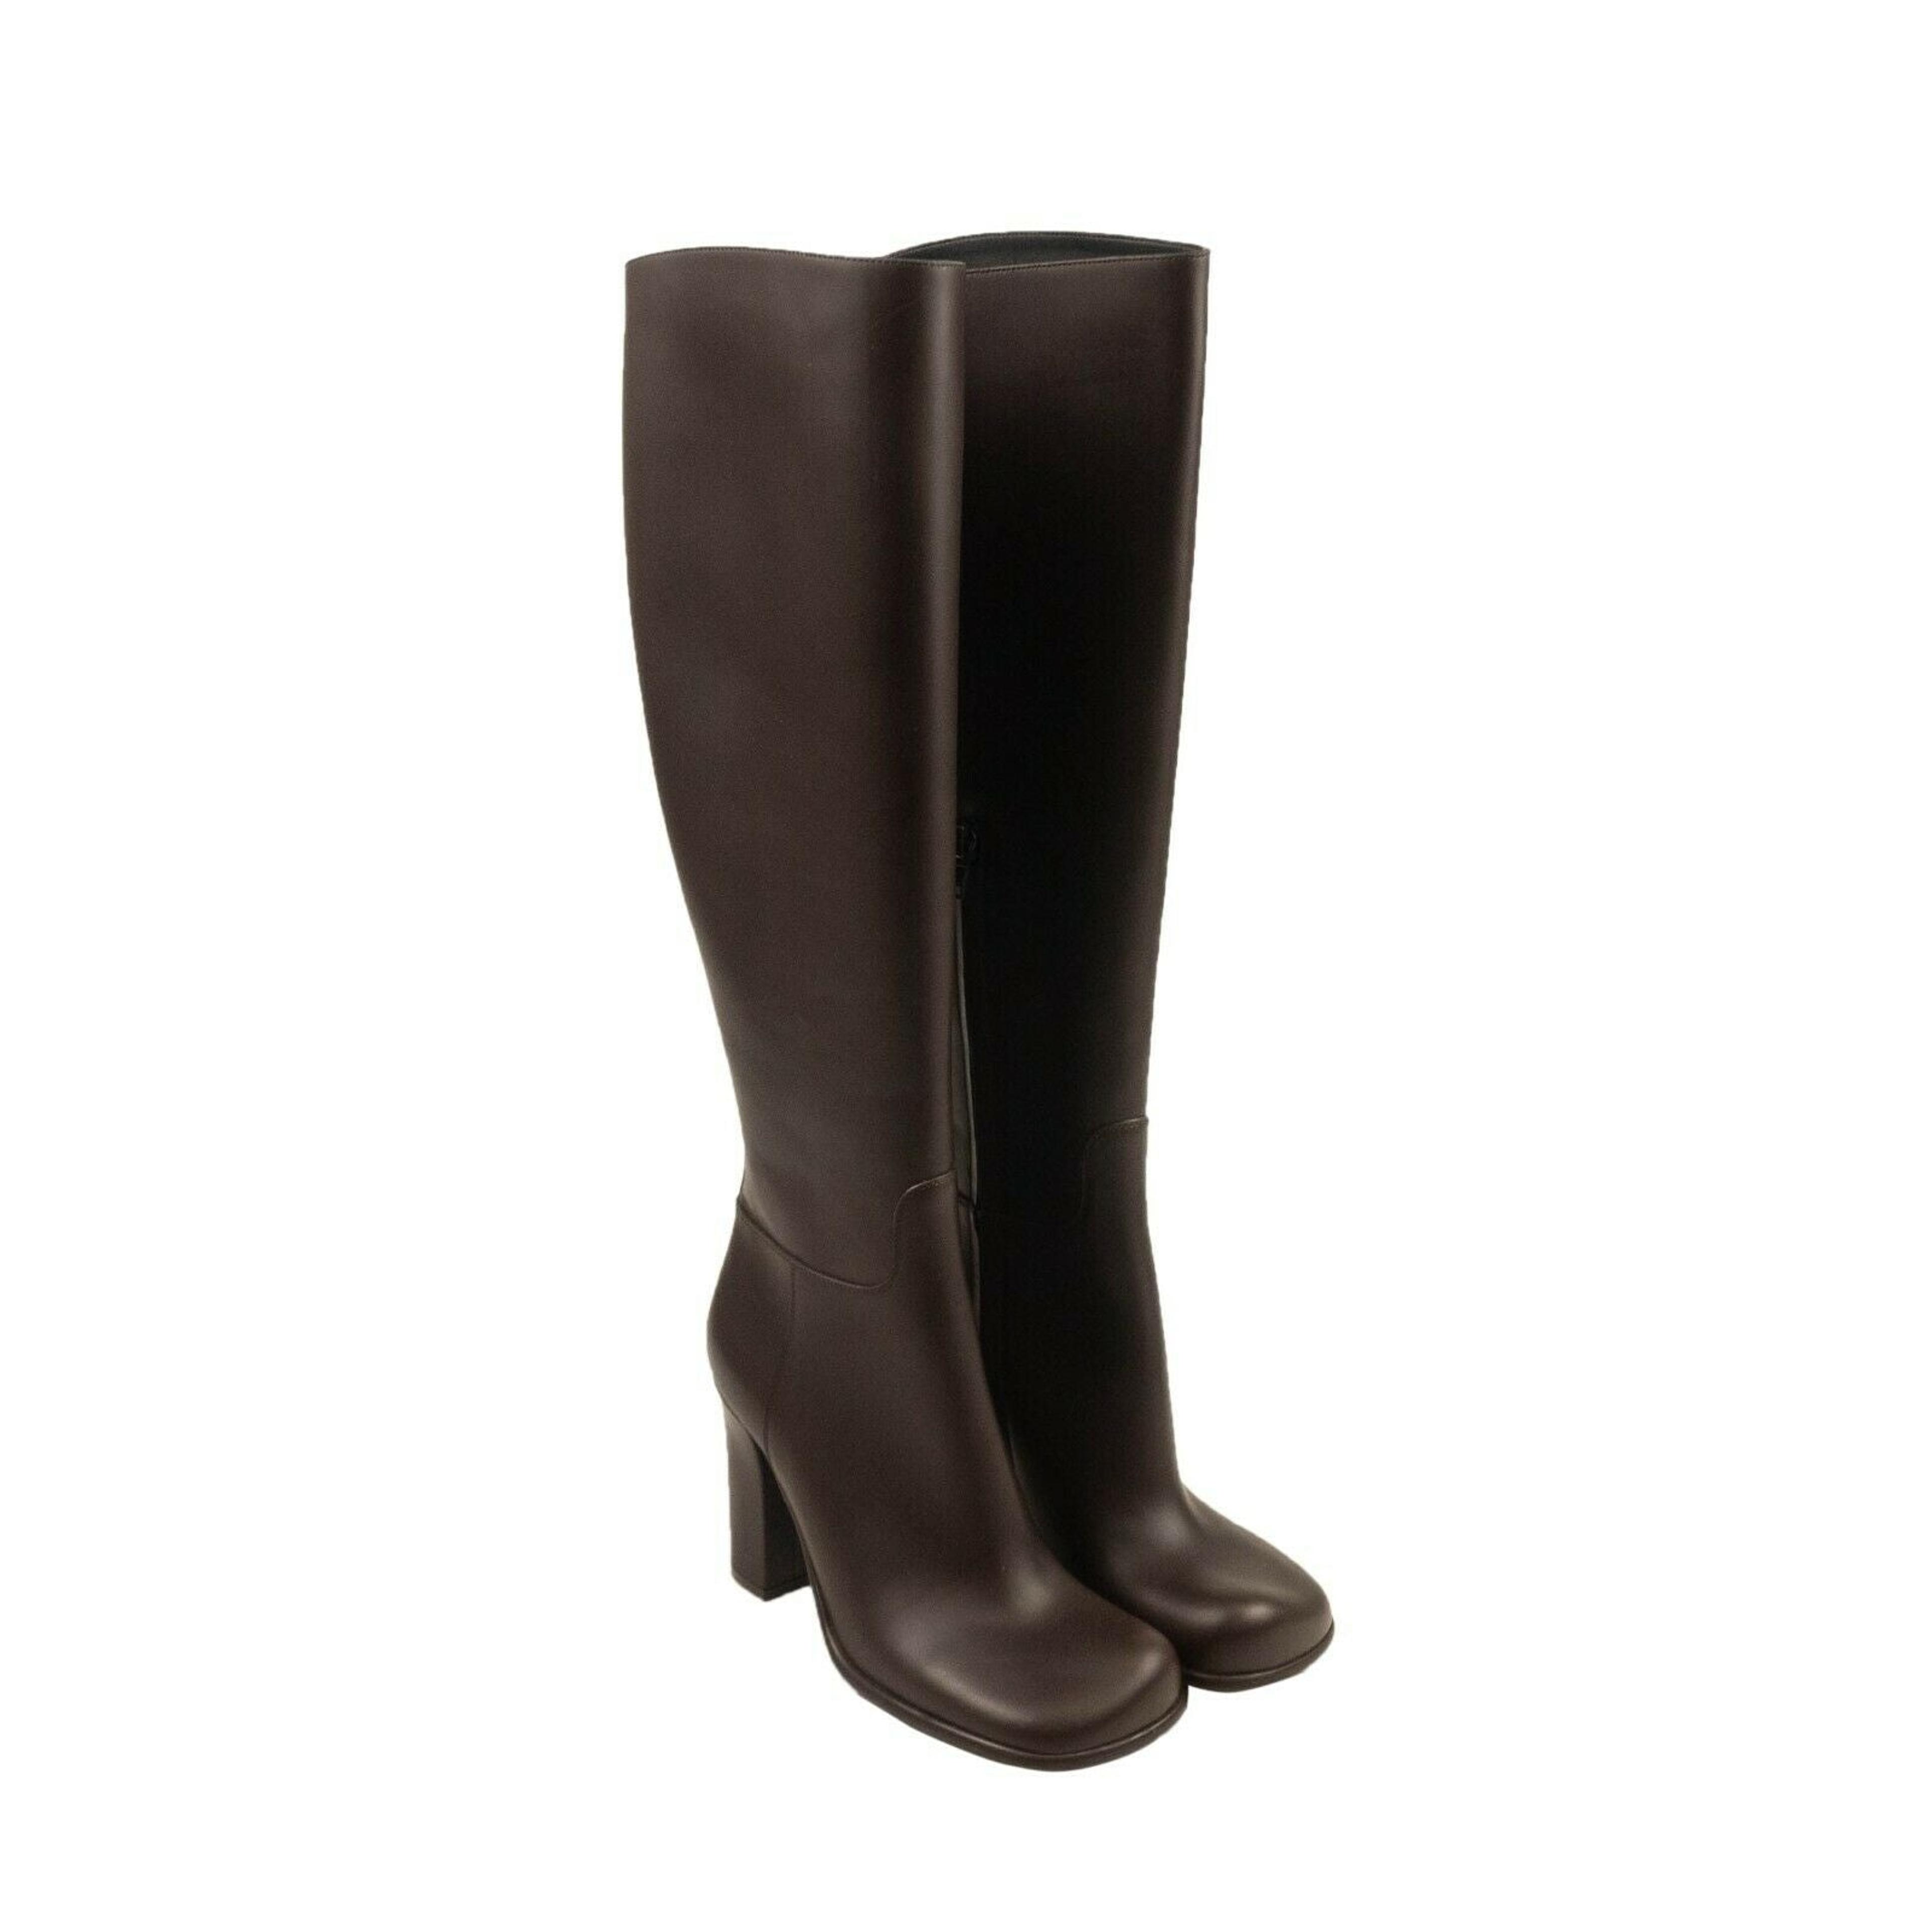 Alternate View 2 of Brown Storm Square Toe Knee High Boots